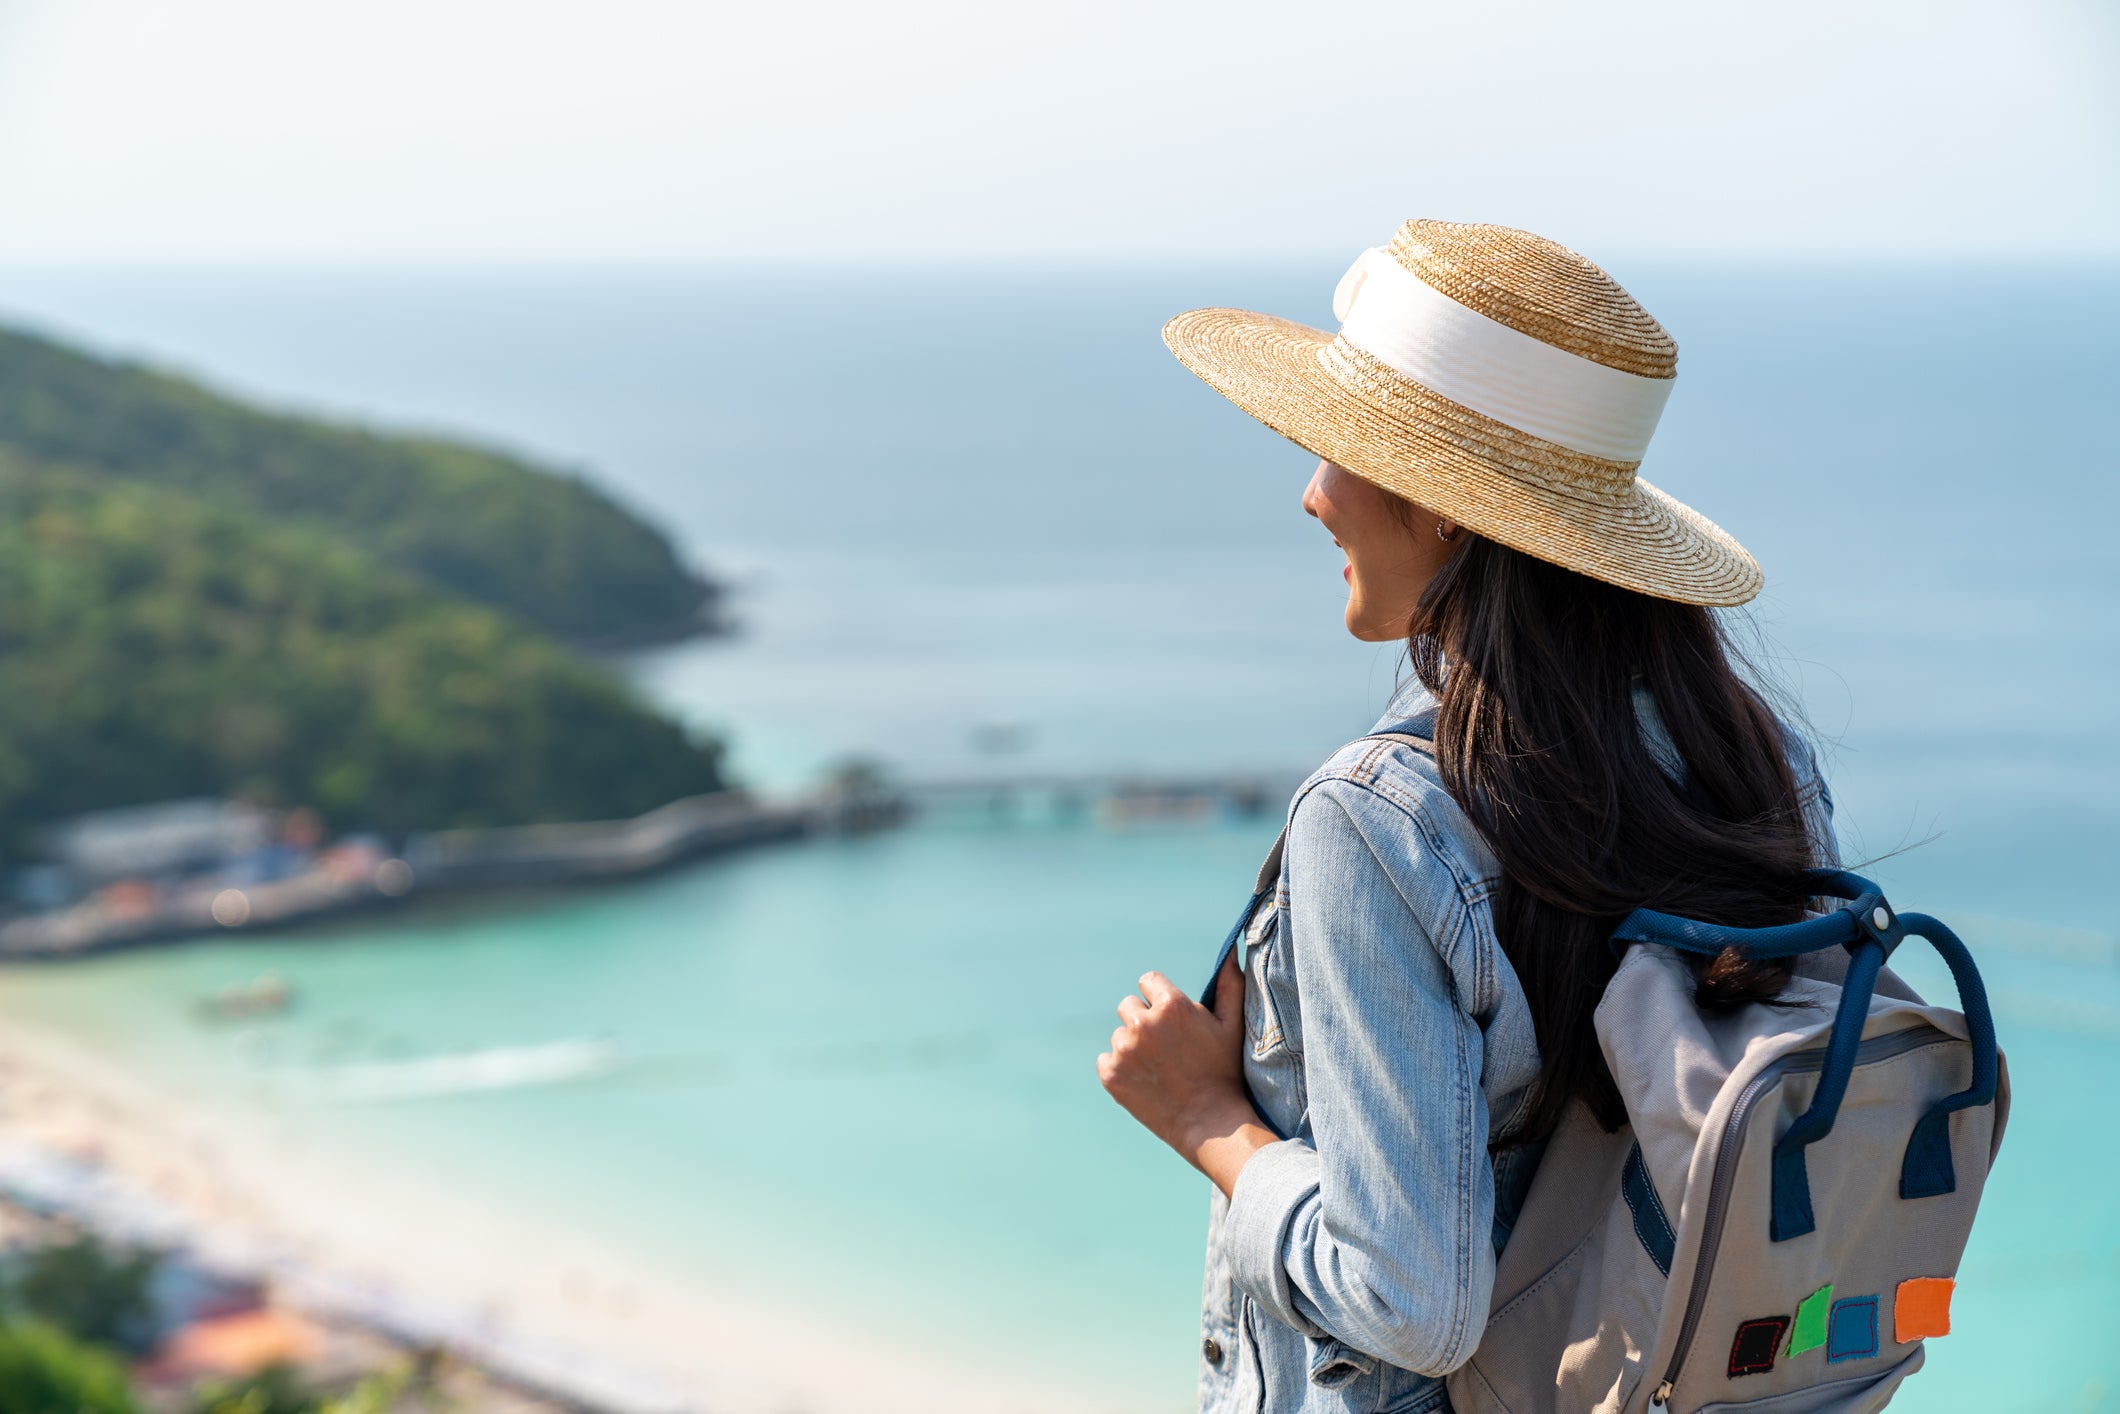 A quarter of adults want to experience solo travelling